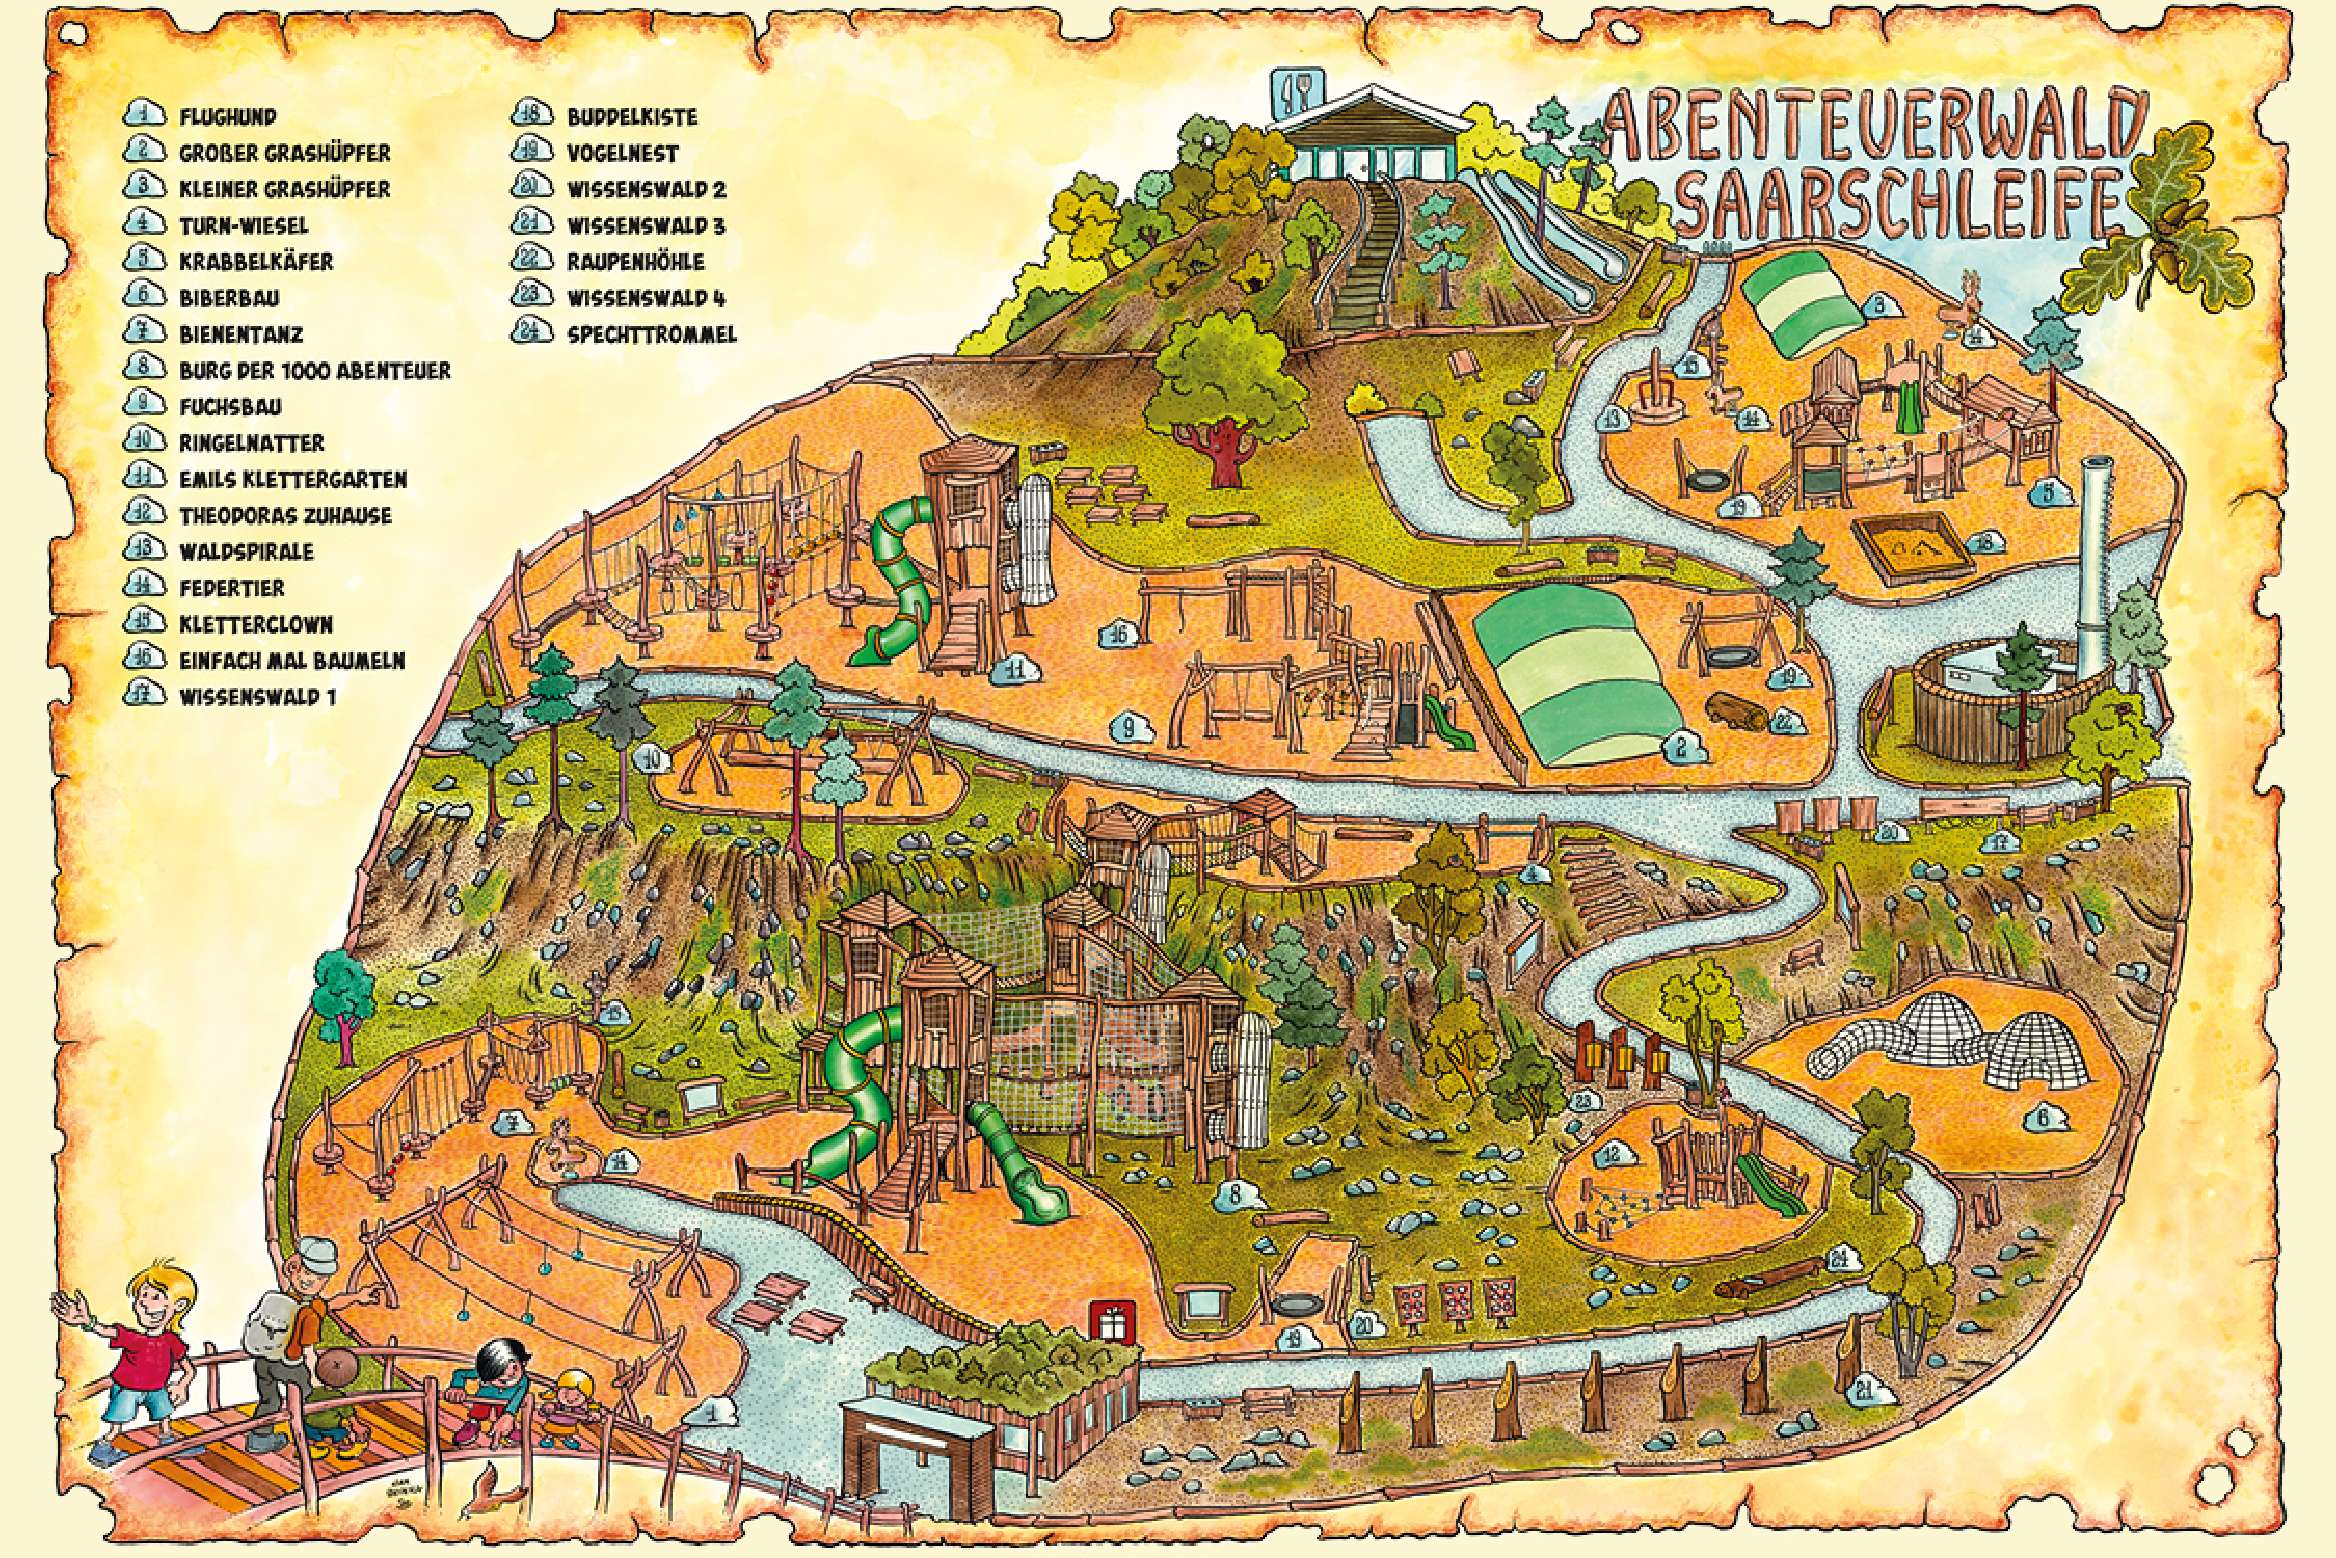 Map and legend of all the items available to play on in the Adventure Forest Saarschleife.